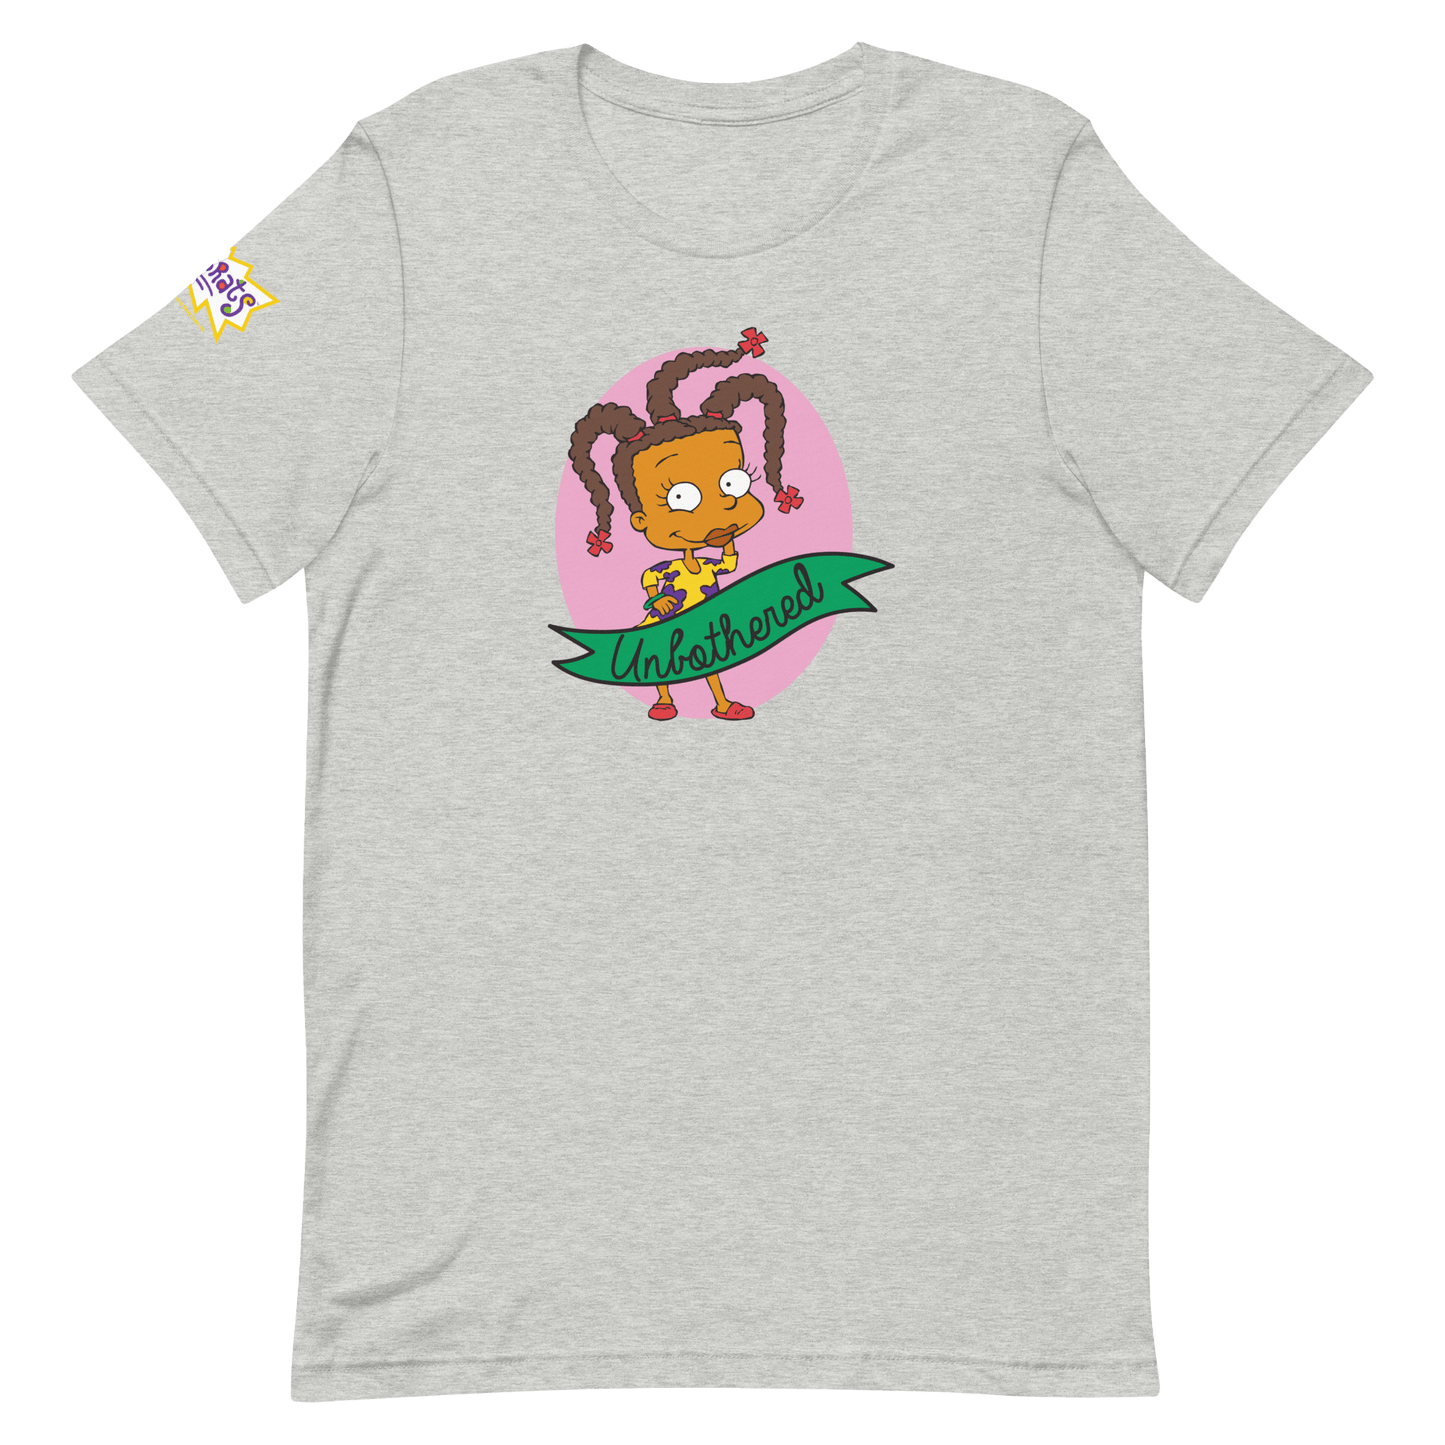 Rugrats Susie Unbothered Adult Short Sleeve T - Shirt - Paramount Shop